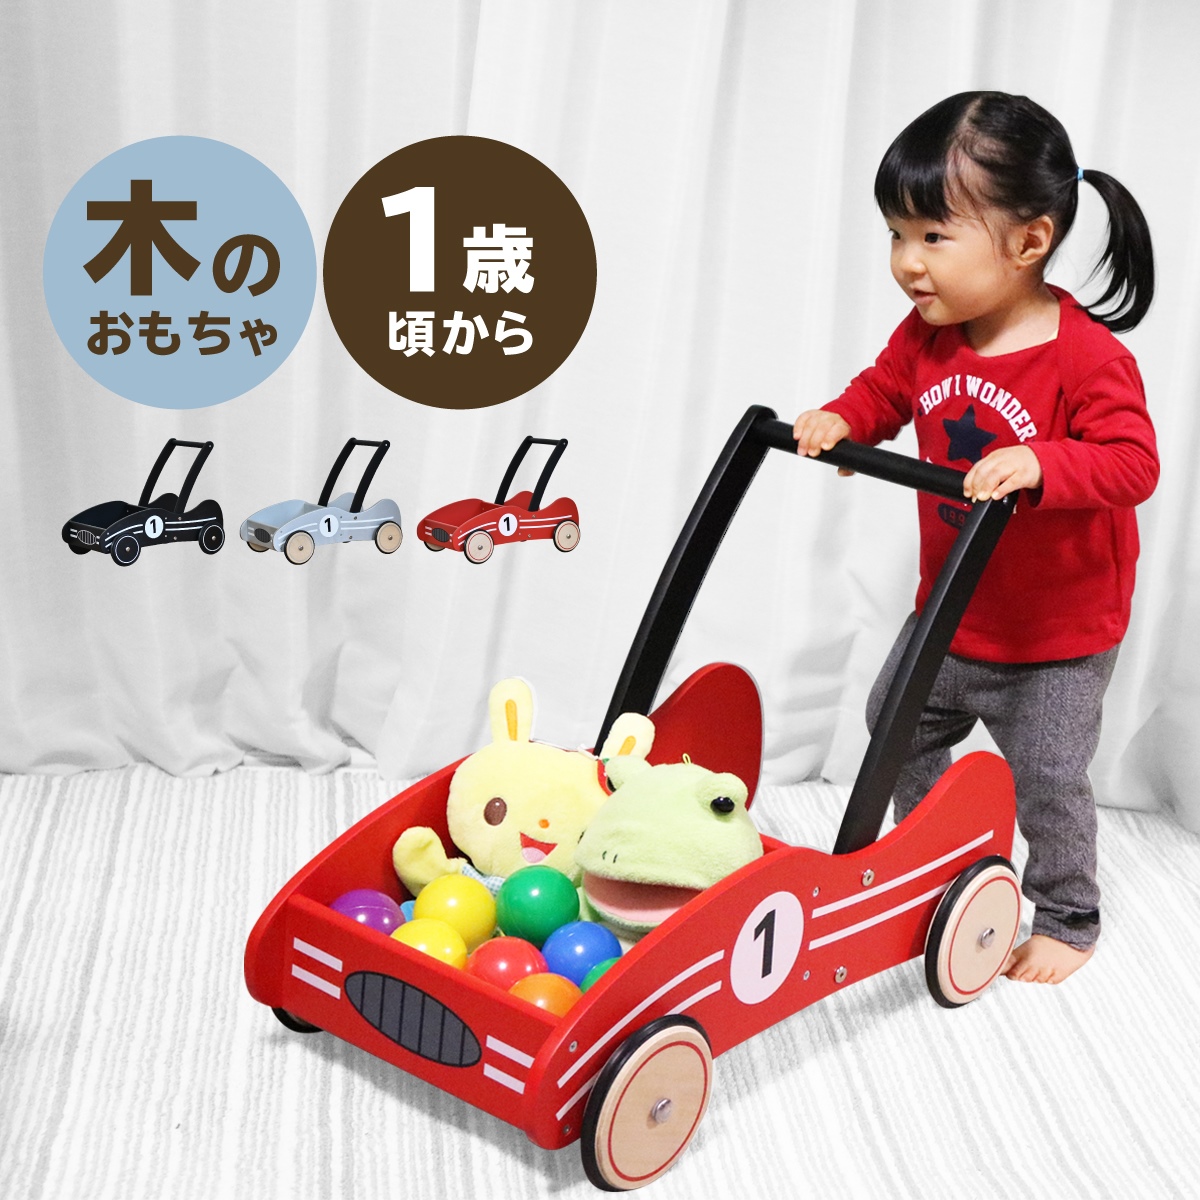 push and walk toys for babies